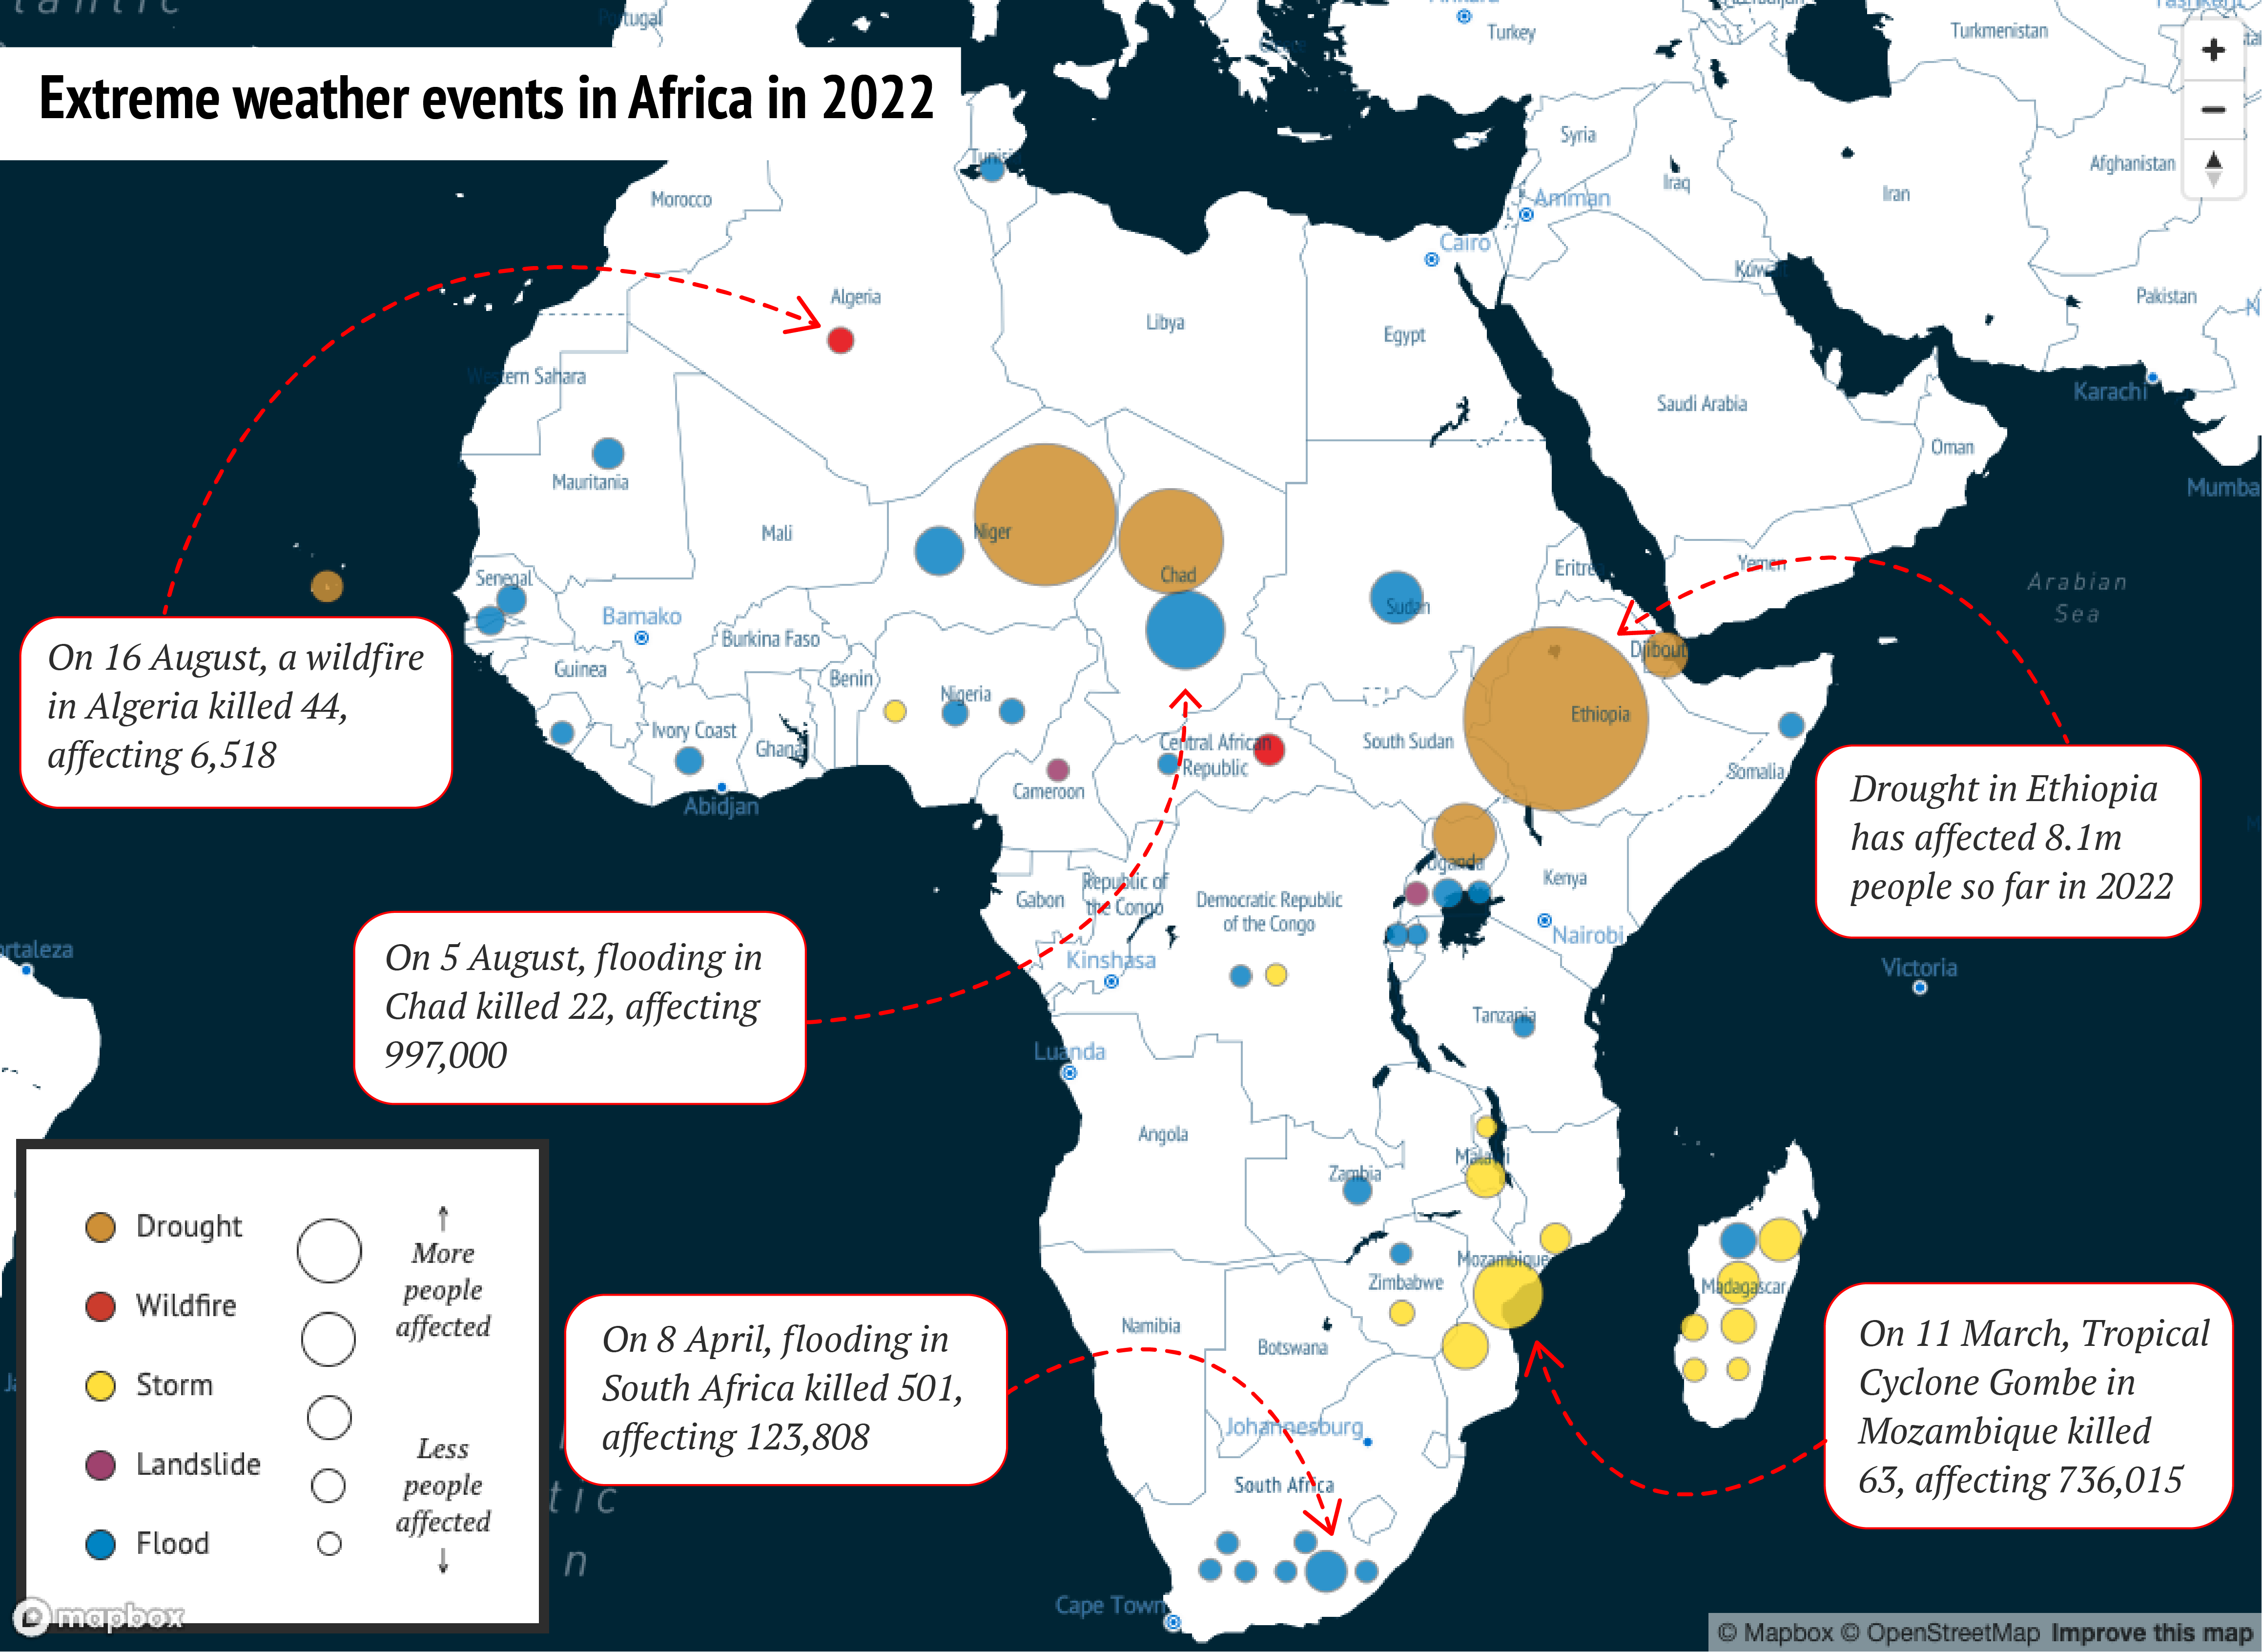 Extreme weather events in Africa in January-October 2022.